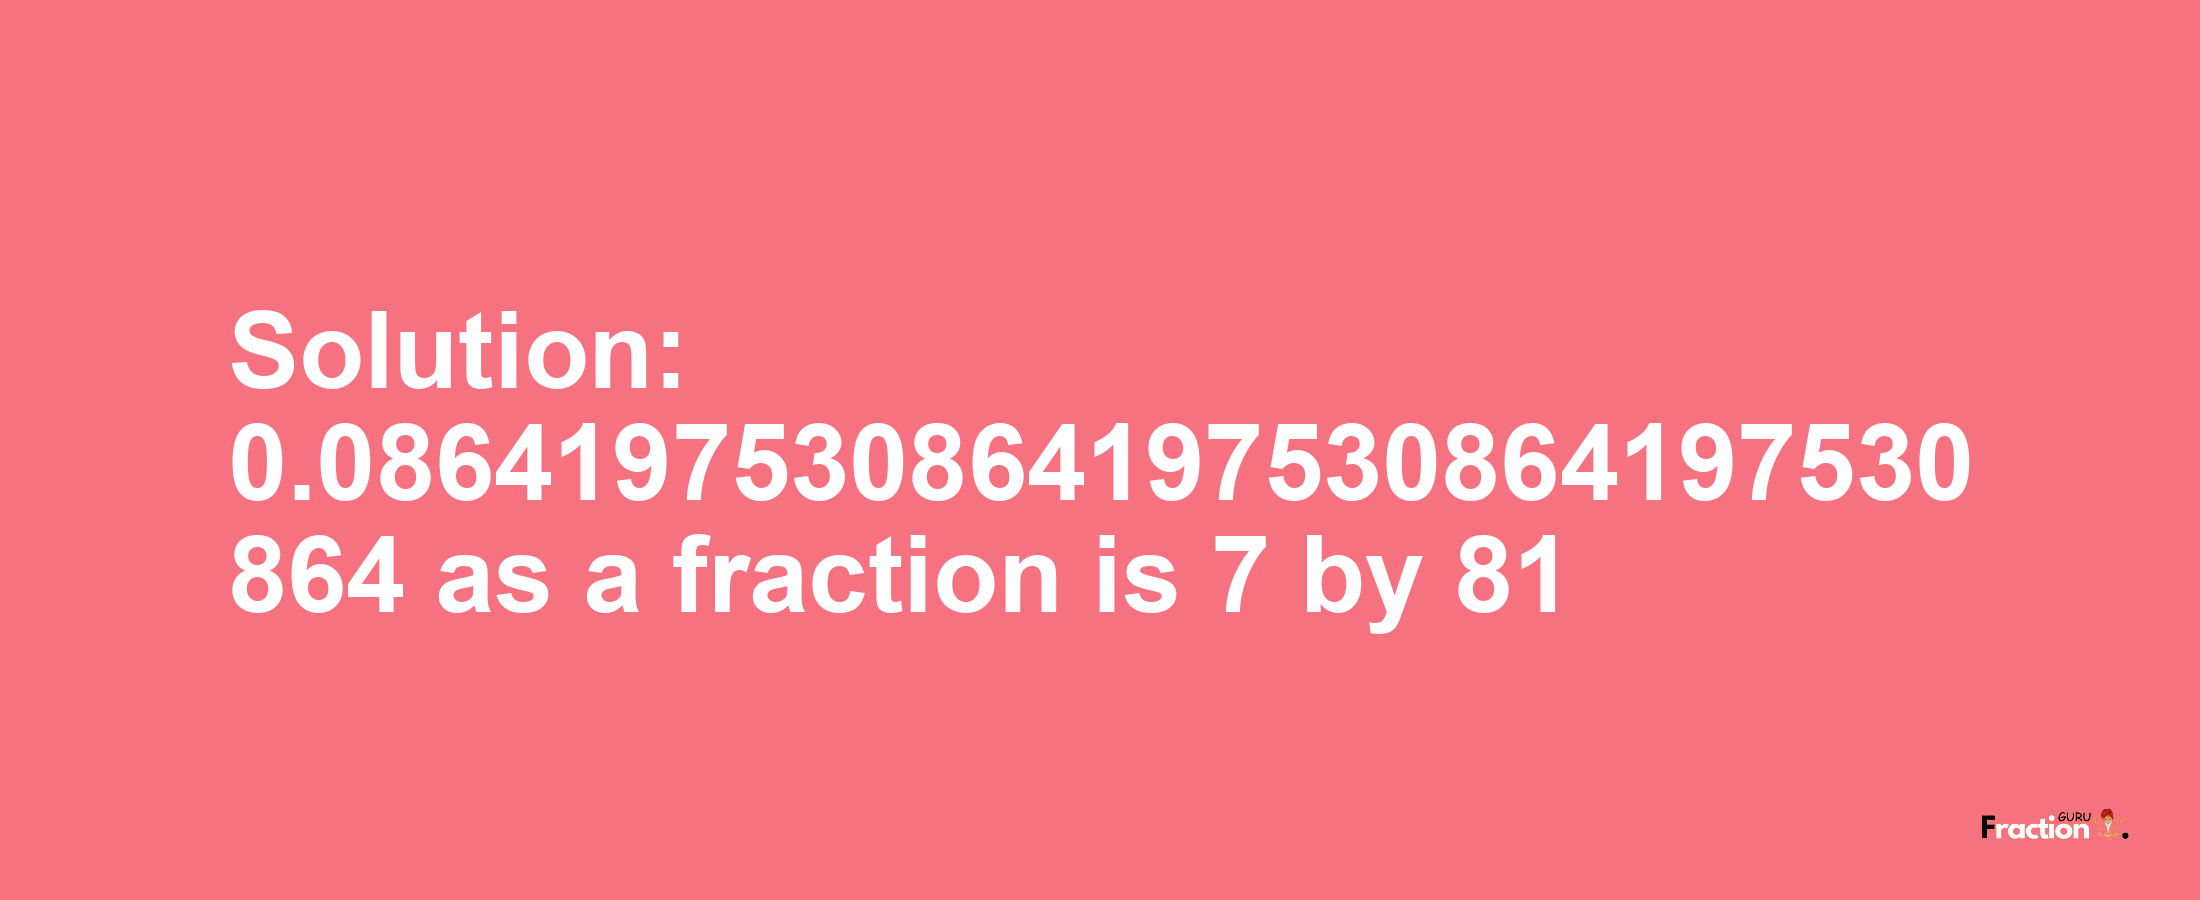 Solution:0.0864197530864197530864197530864 as a fraction is 7/81